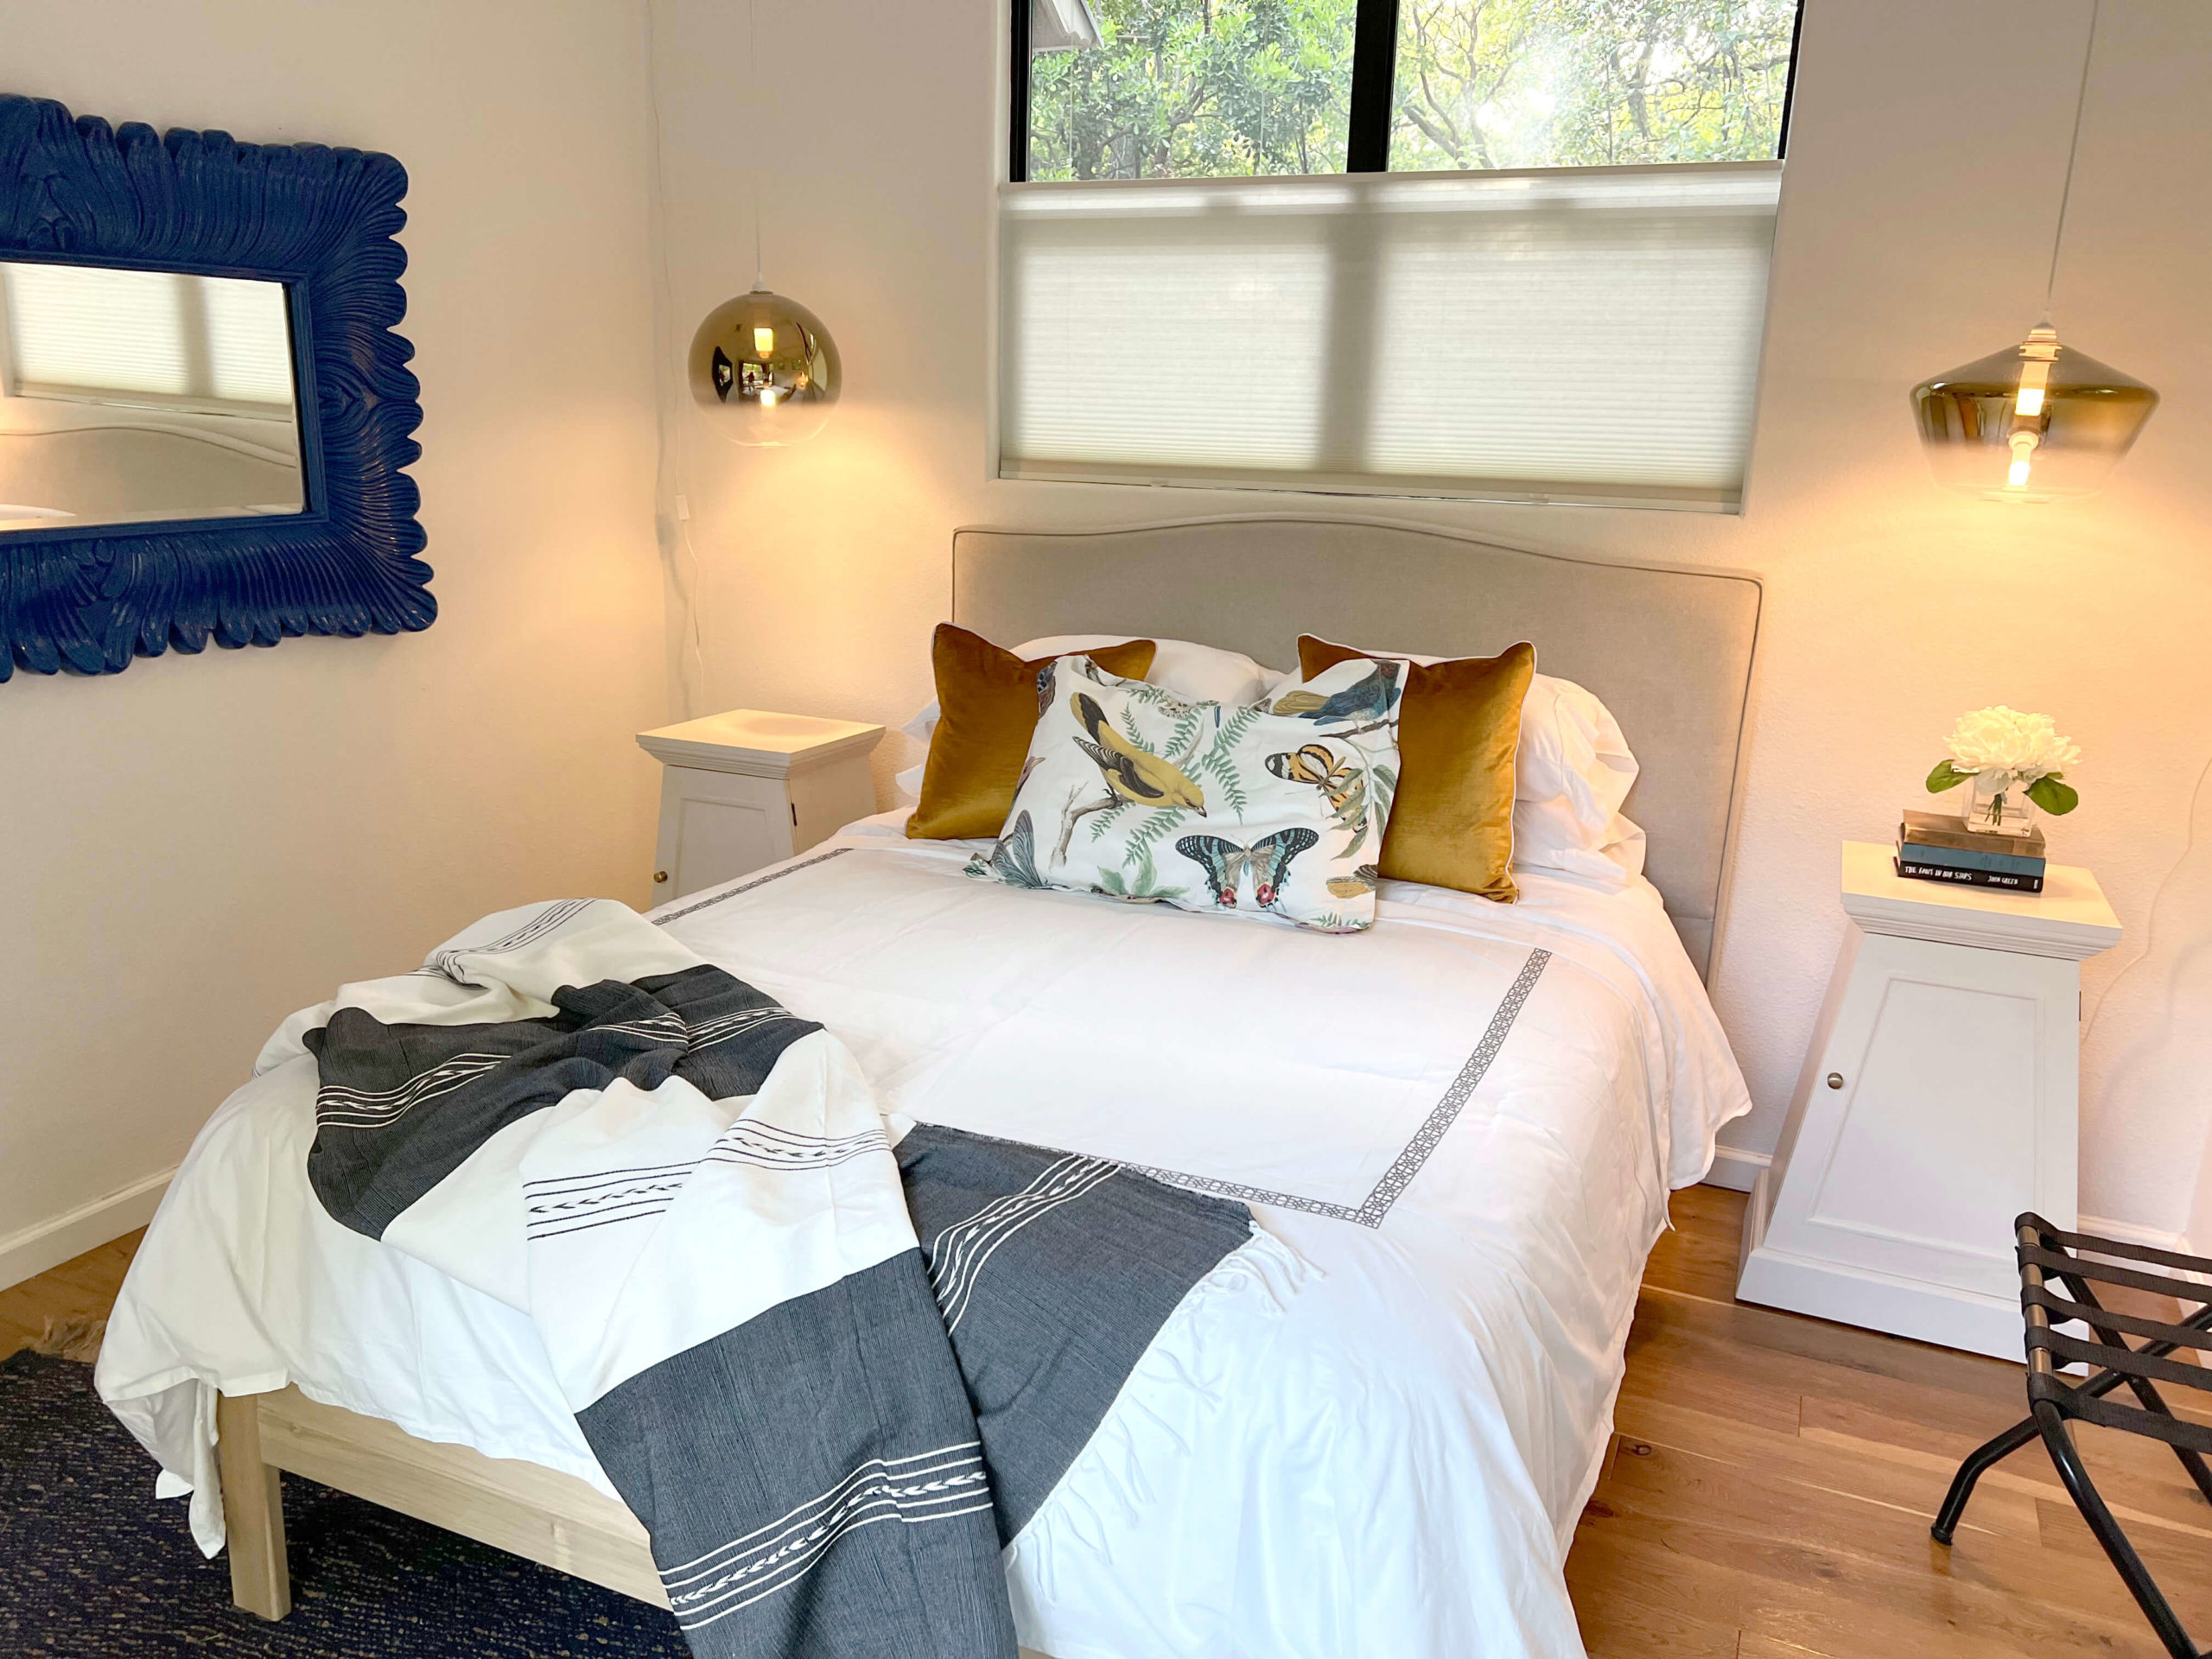 Main bedroom of Bouldin Creek Airbnb in South Austin, Texas, with Mexican bedspread, butterfly pillow, yellow pillows, hanging pendant lights